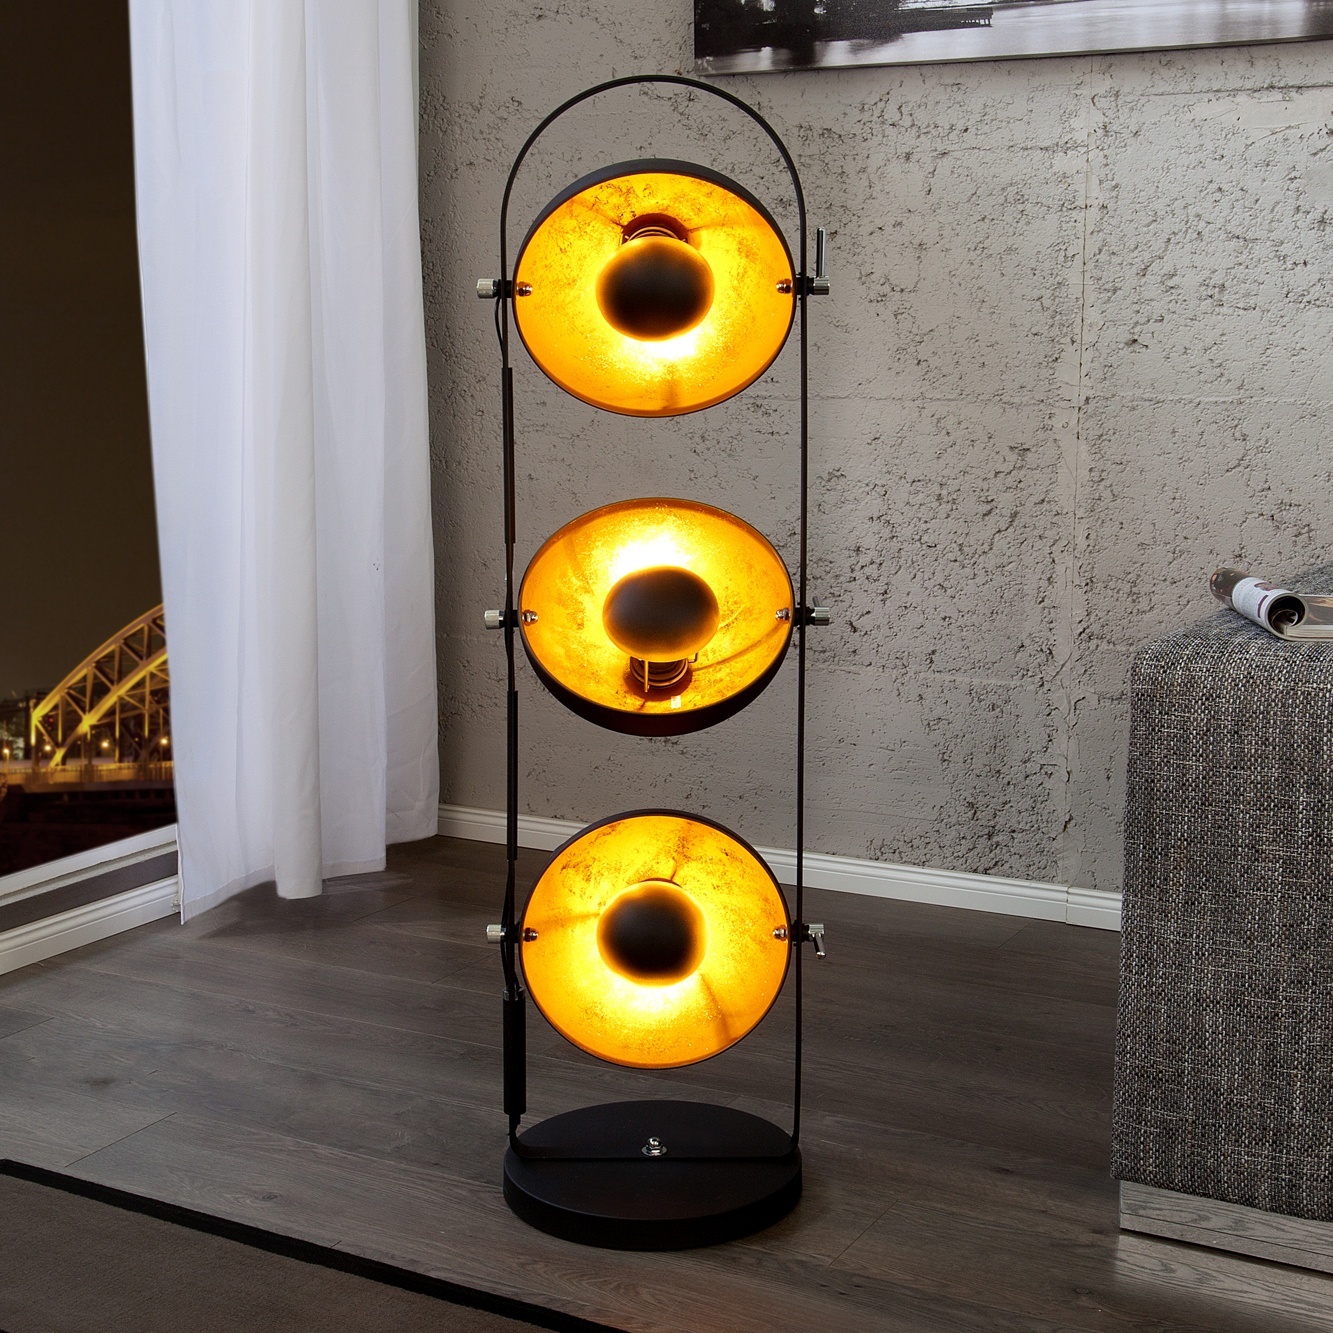 Studio style lamp with 3 adjustable and gold spots